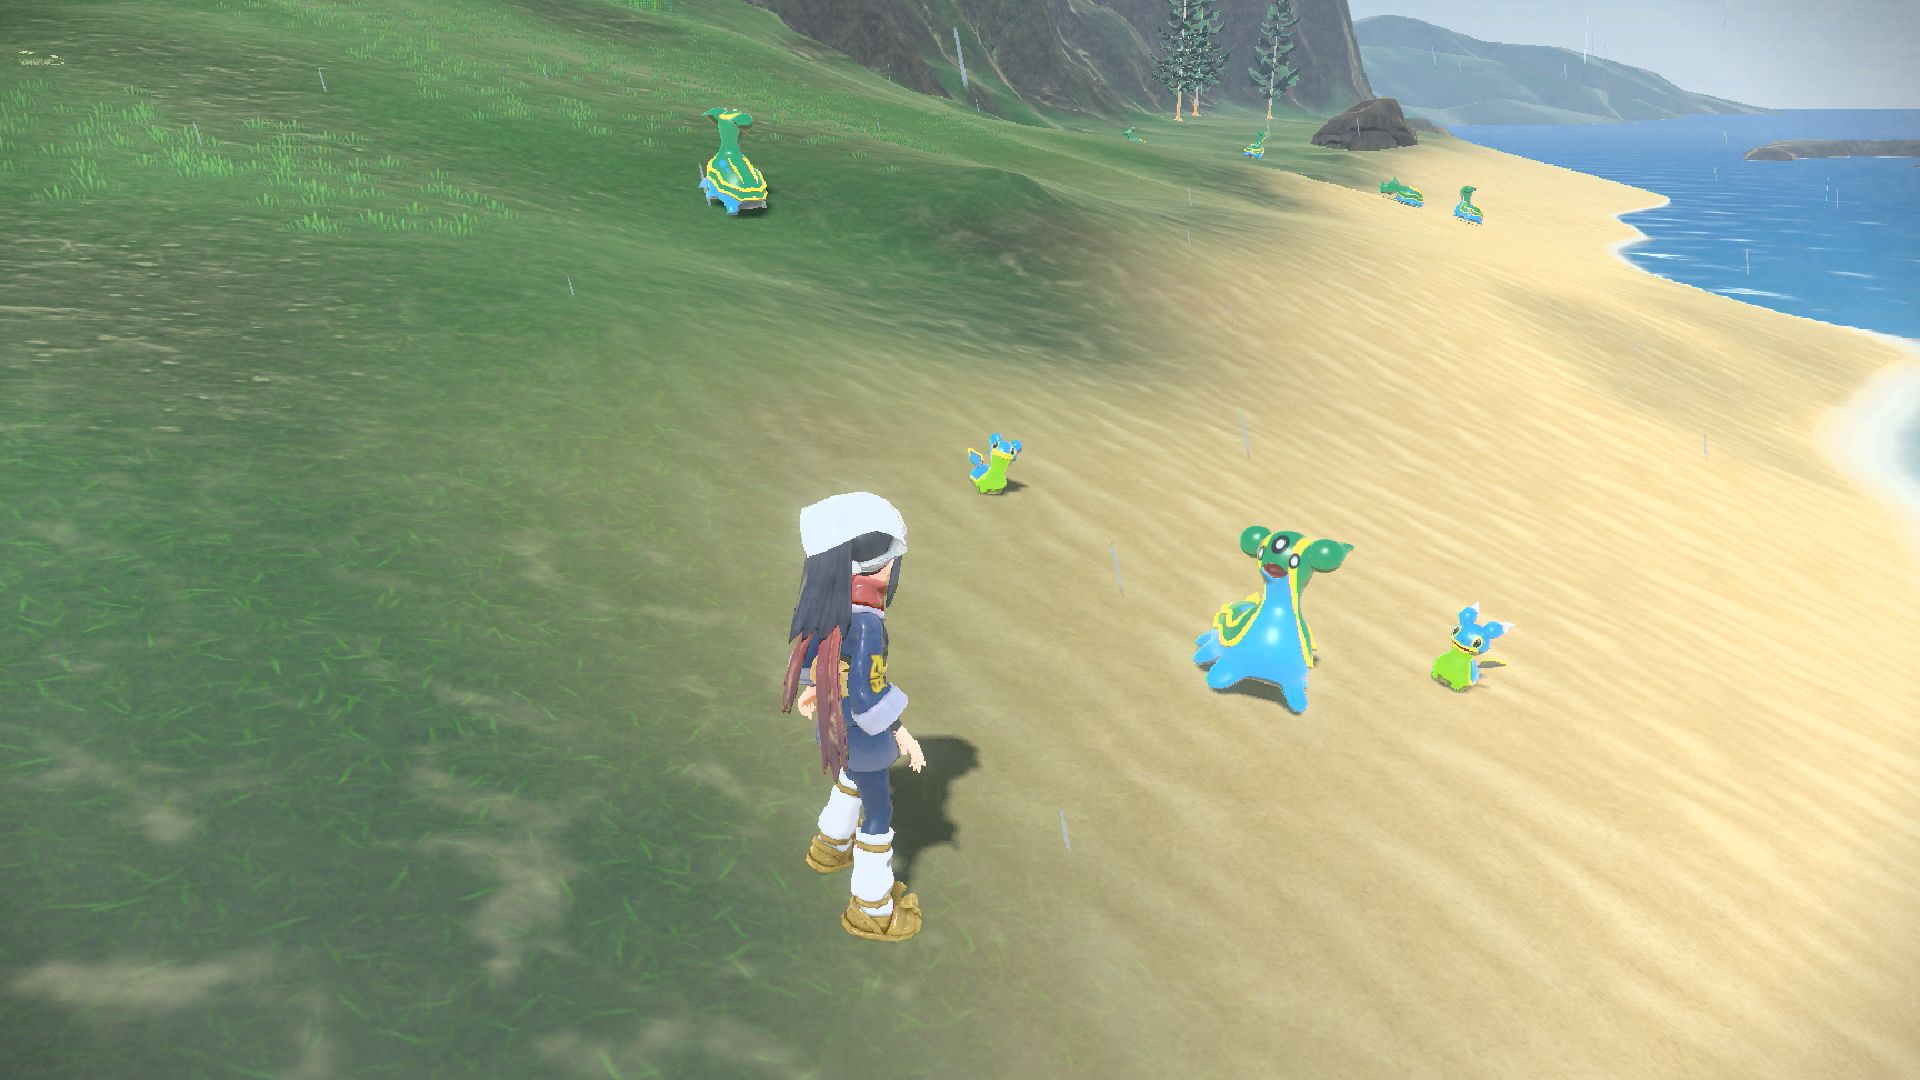 It turns out, running in a circle completely breaks Pokemon Legends: Arceus